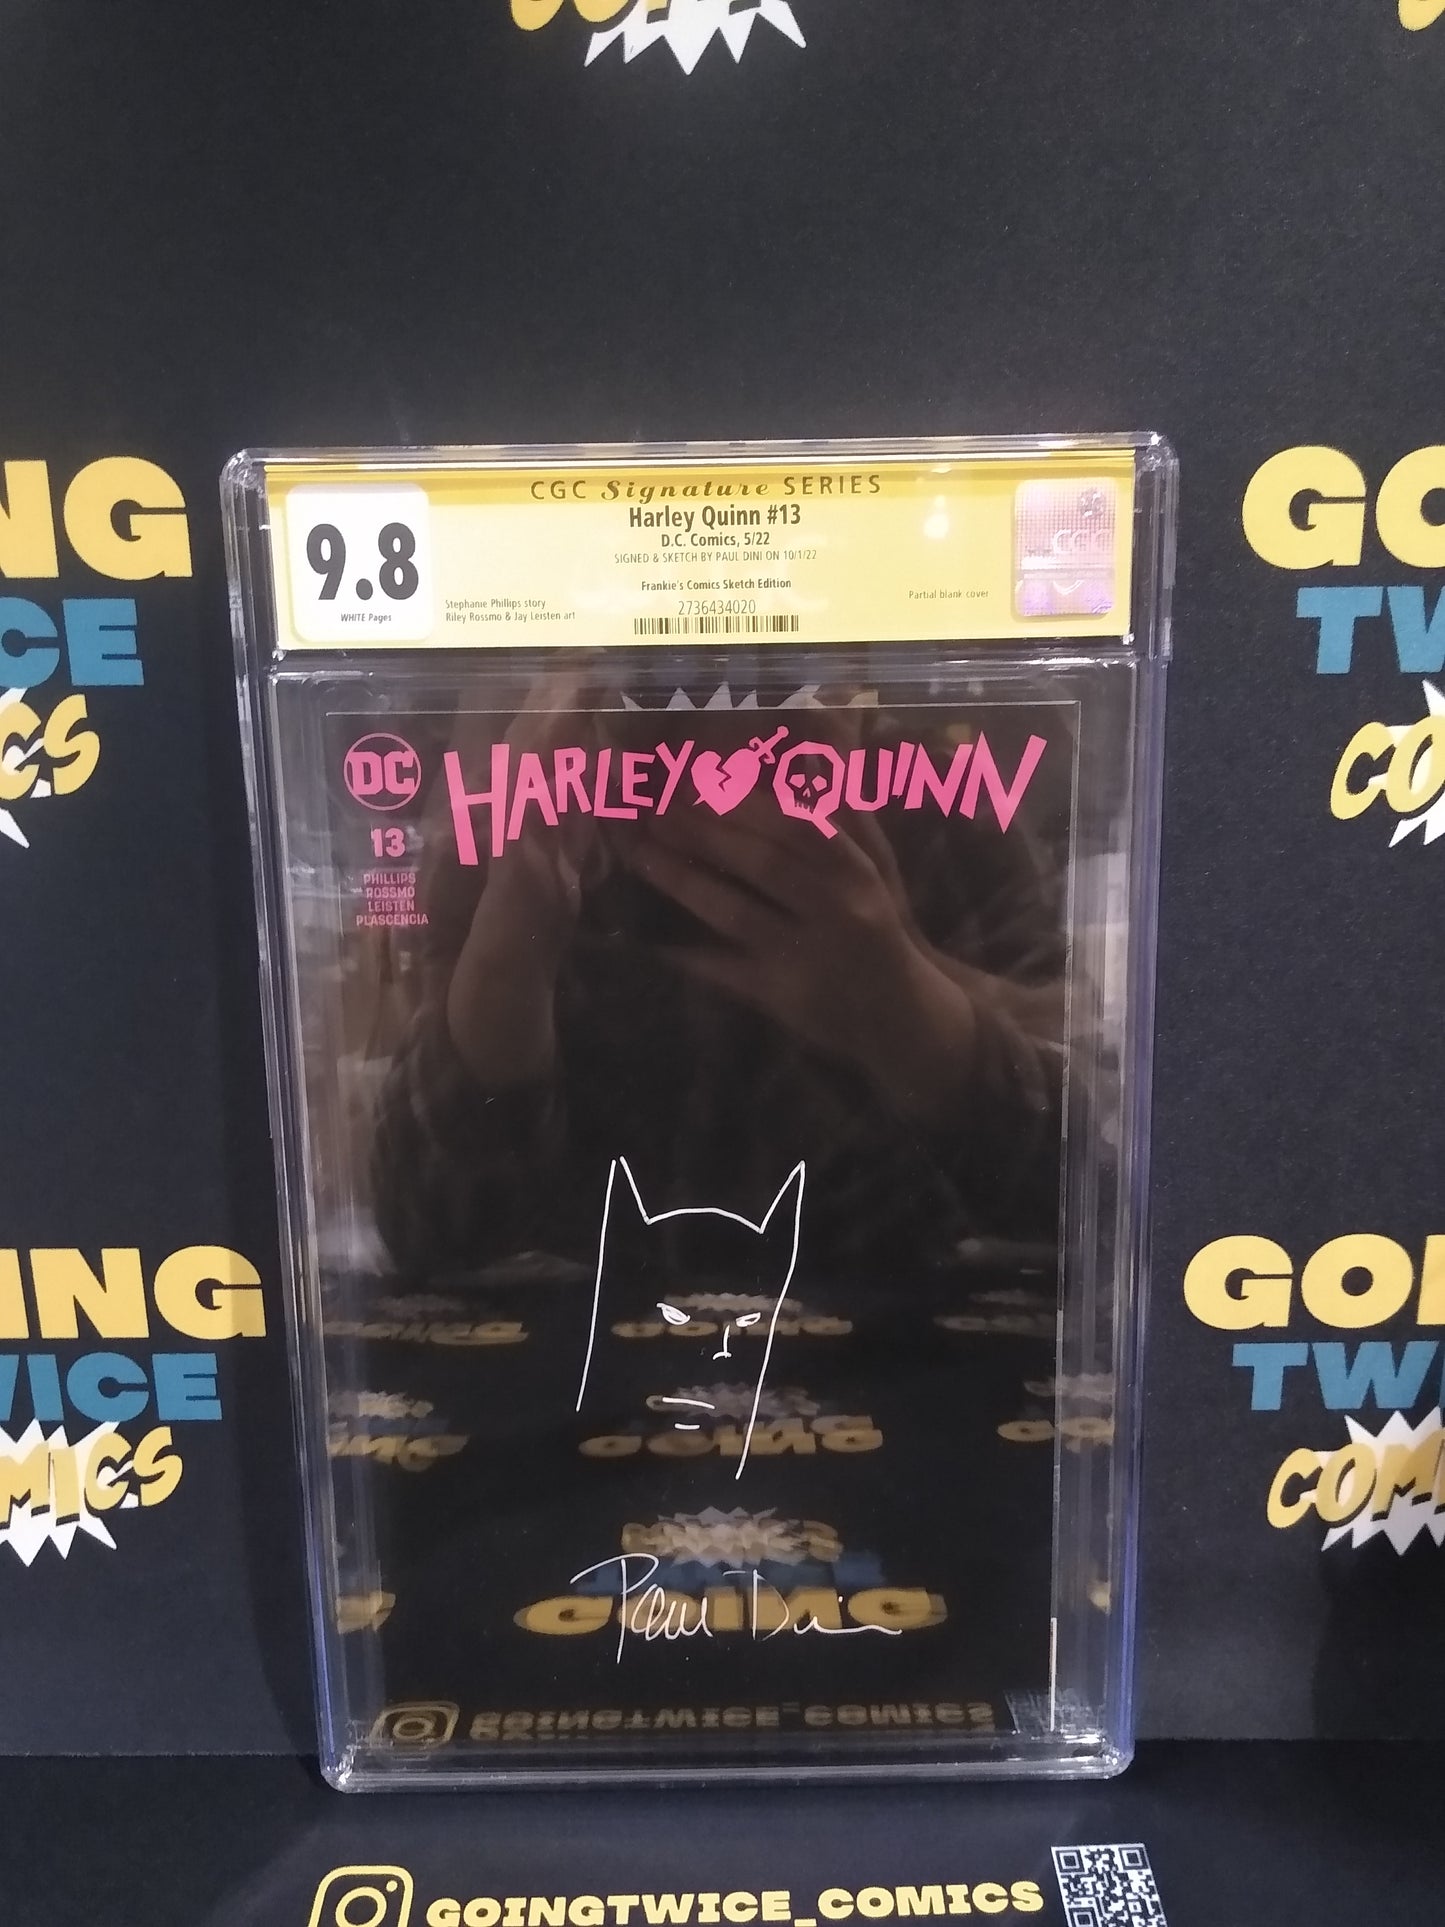 Harley Quinn Frankie's Comics Sketch Edition Signed + Remarked by Paul Dini #1 DC Comic Graded CGC 9.8